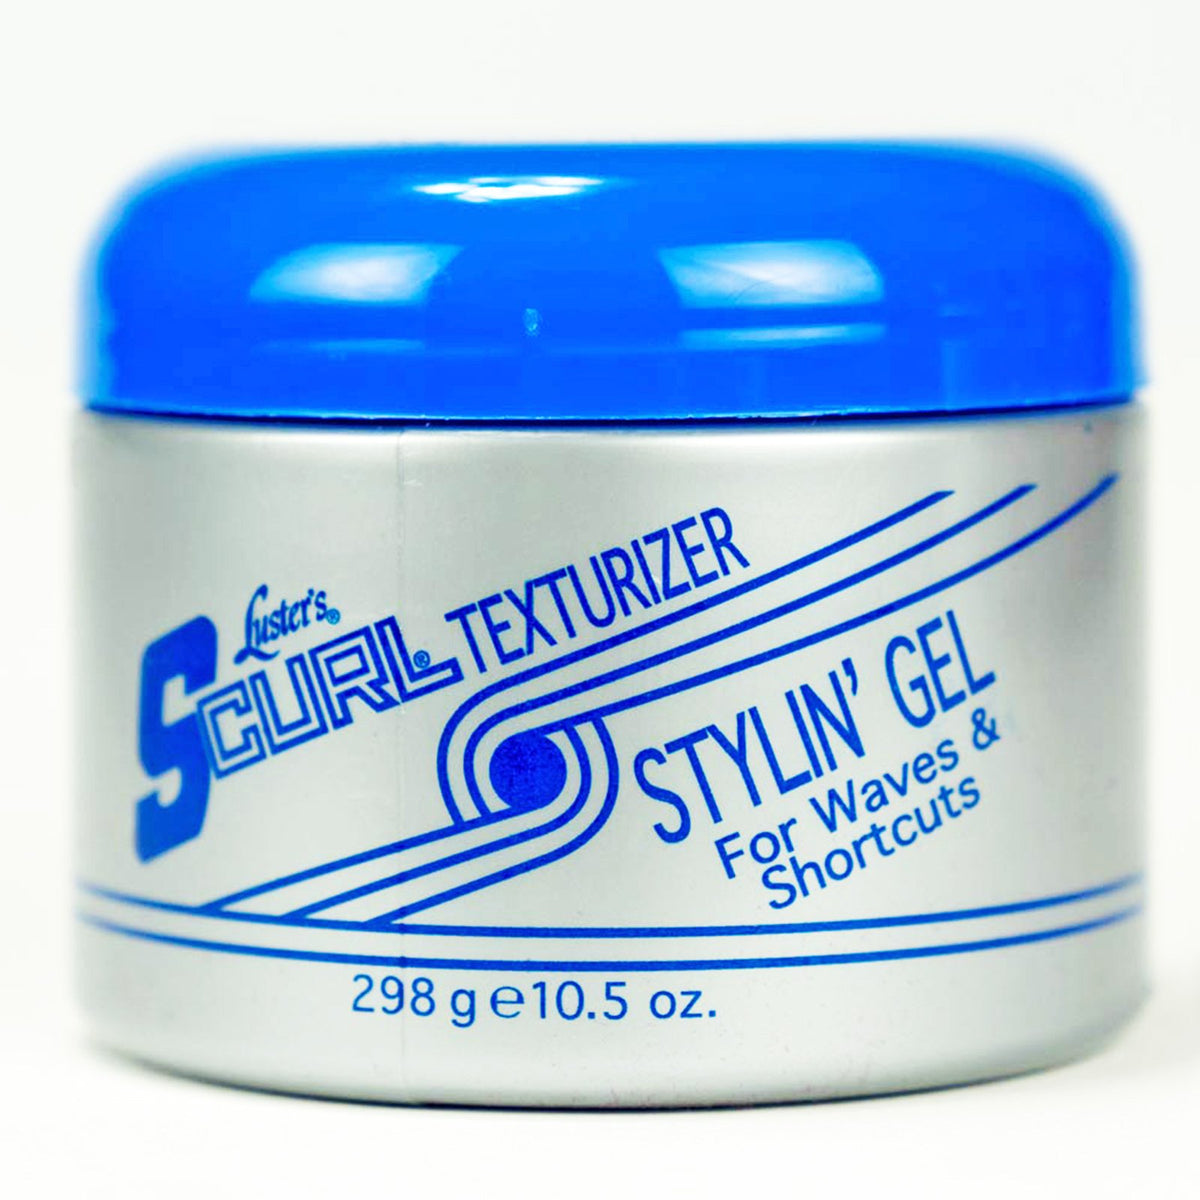 Lusters SCurl Texturiser Styling Gel For Waves & Shortcuts- AQ Online